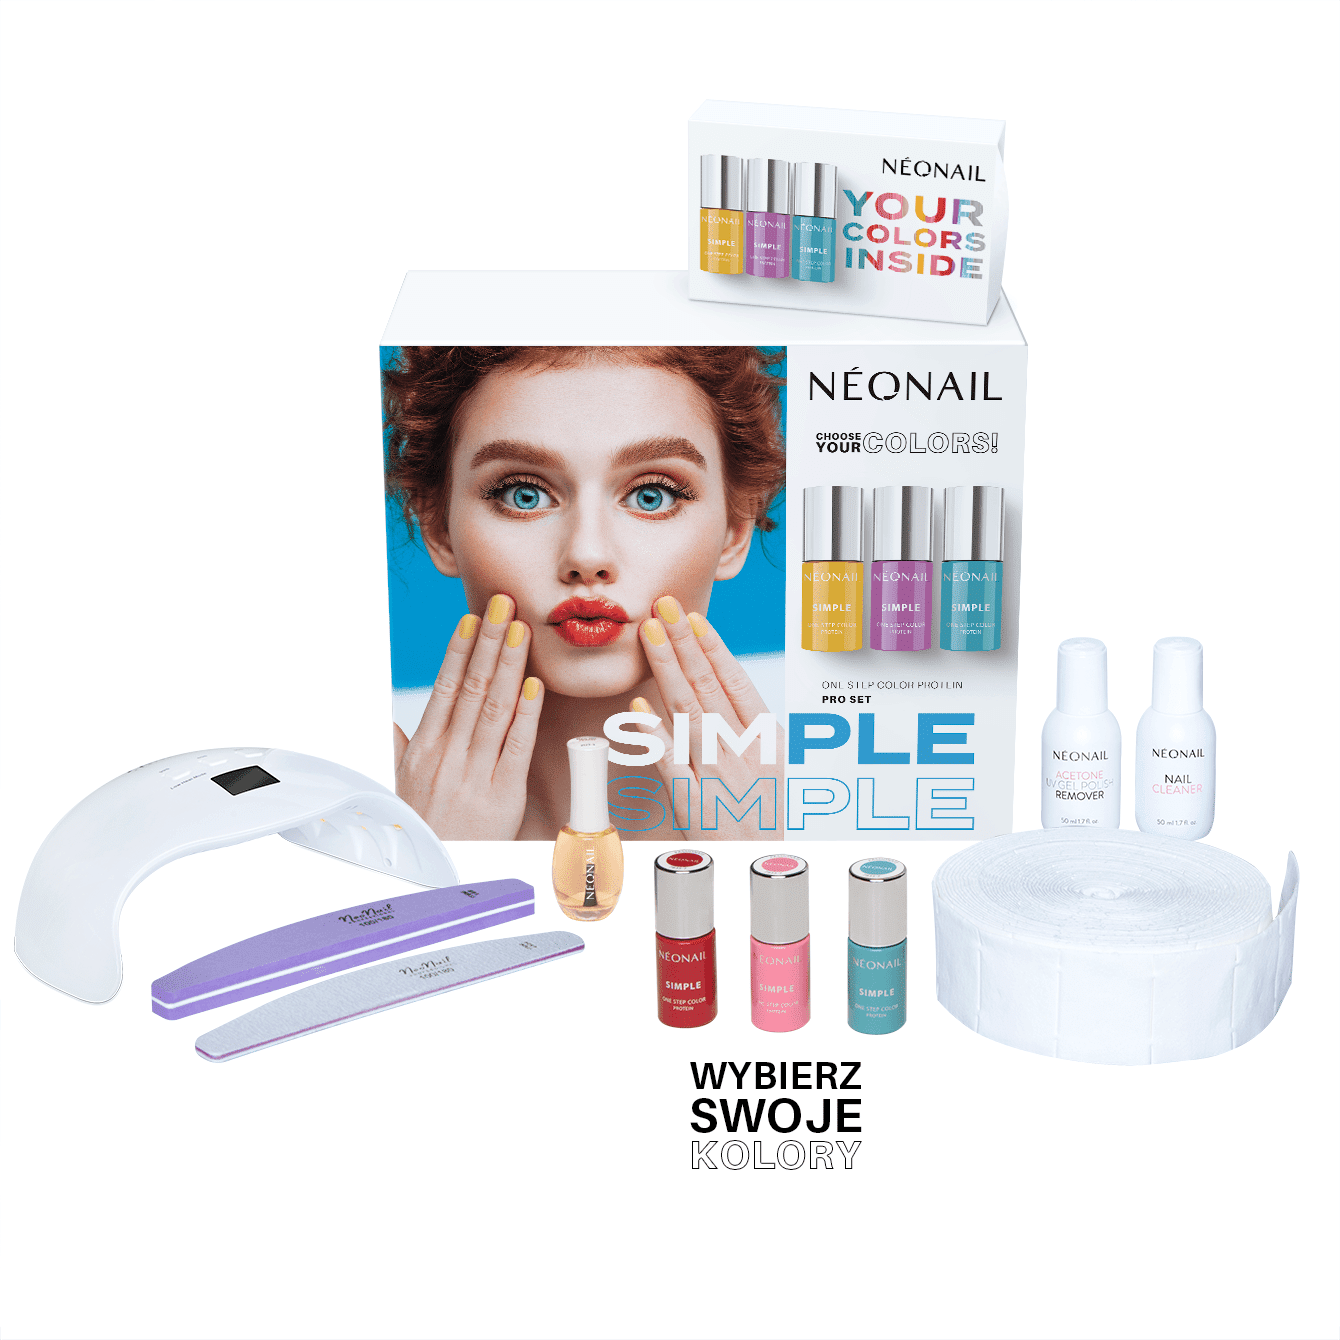 NEONAIL SIMPLE One Step Color Protein PRO Starter Set